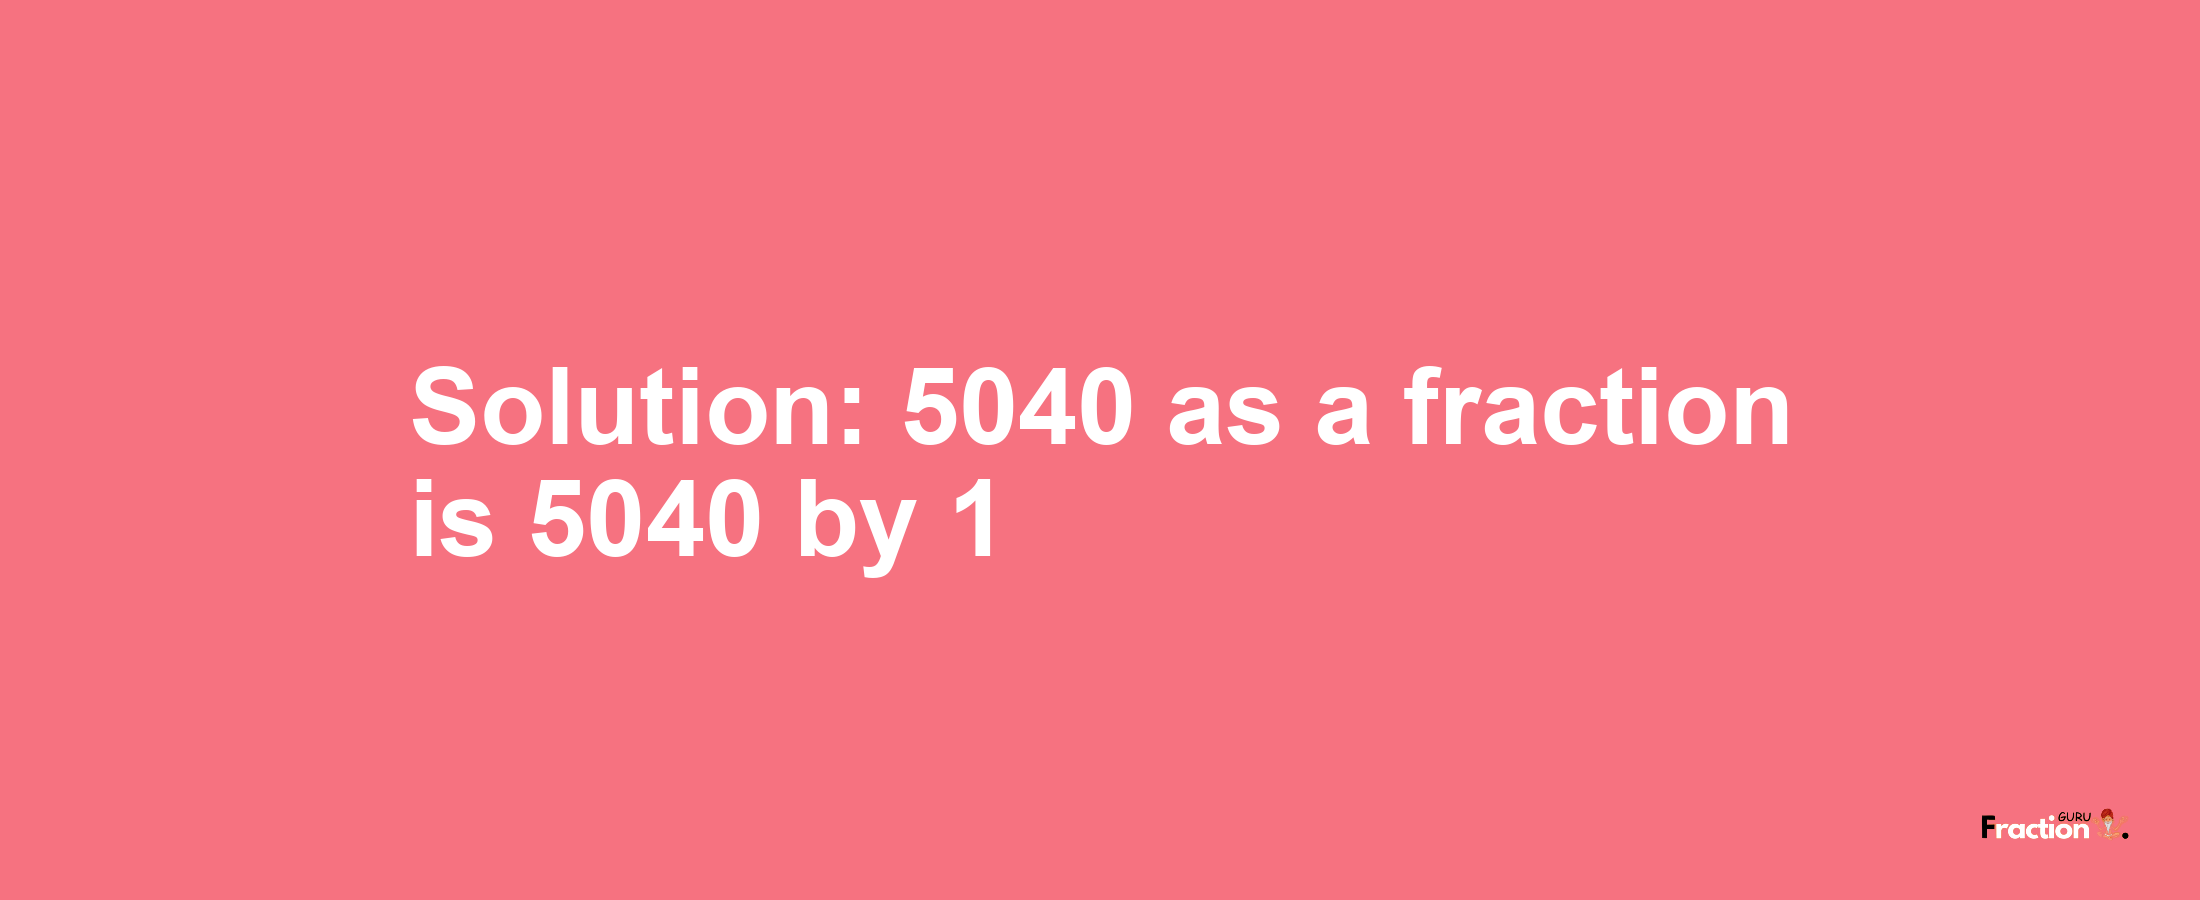 Solution:5040 as a fraction is 5040/1